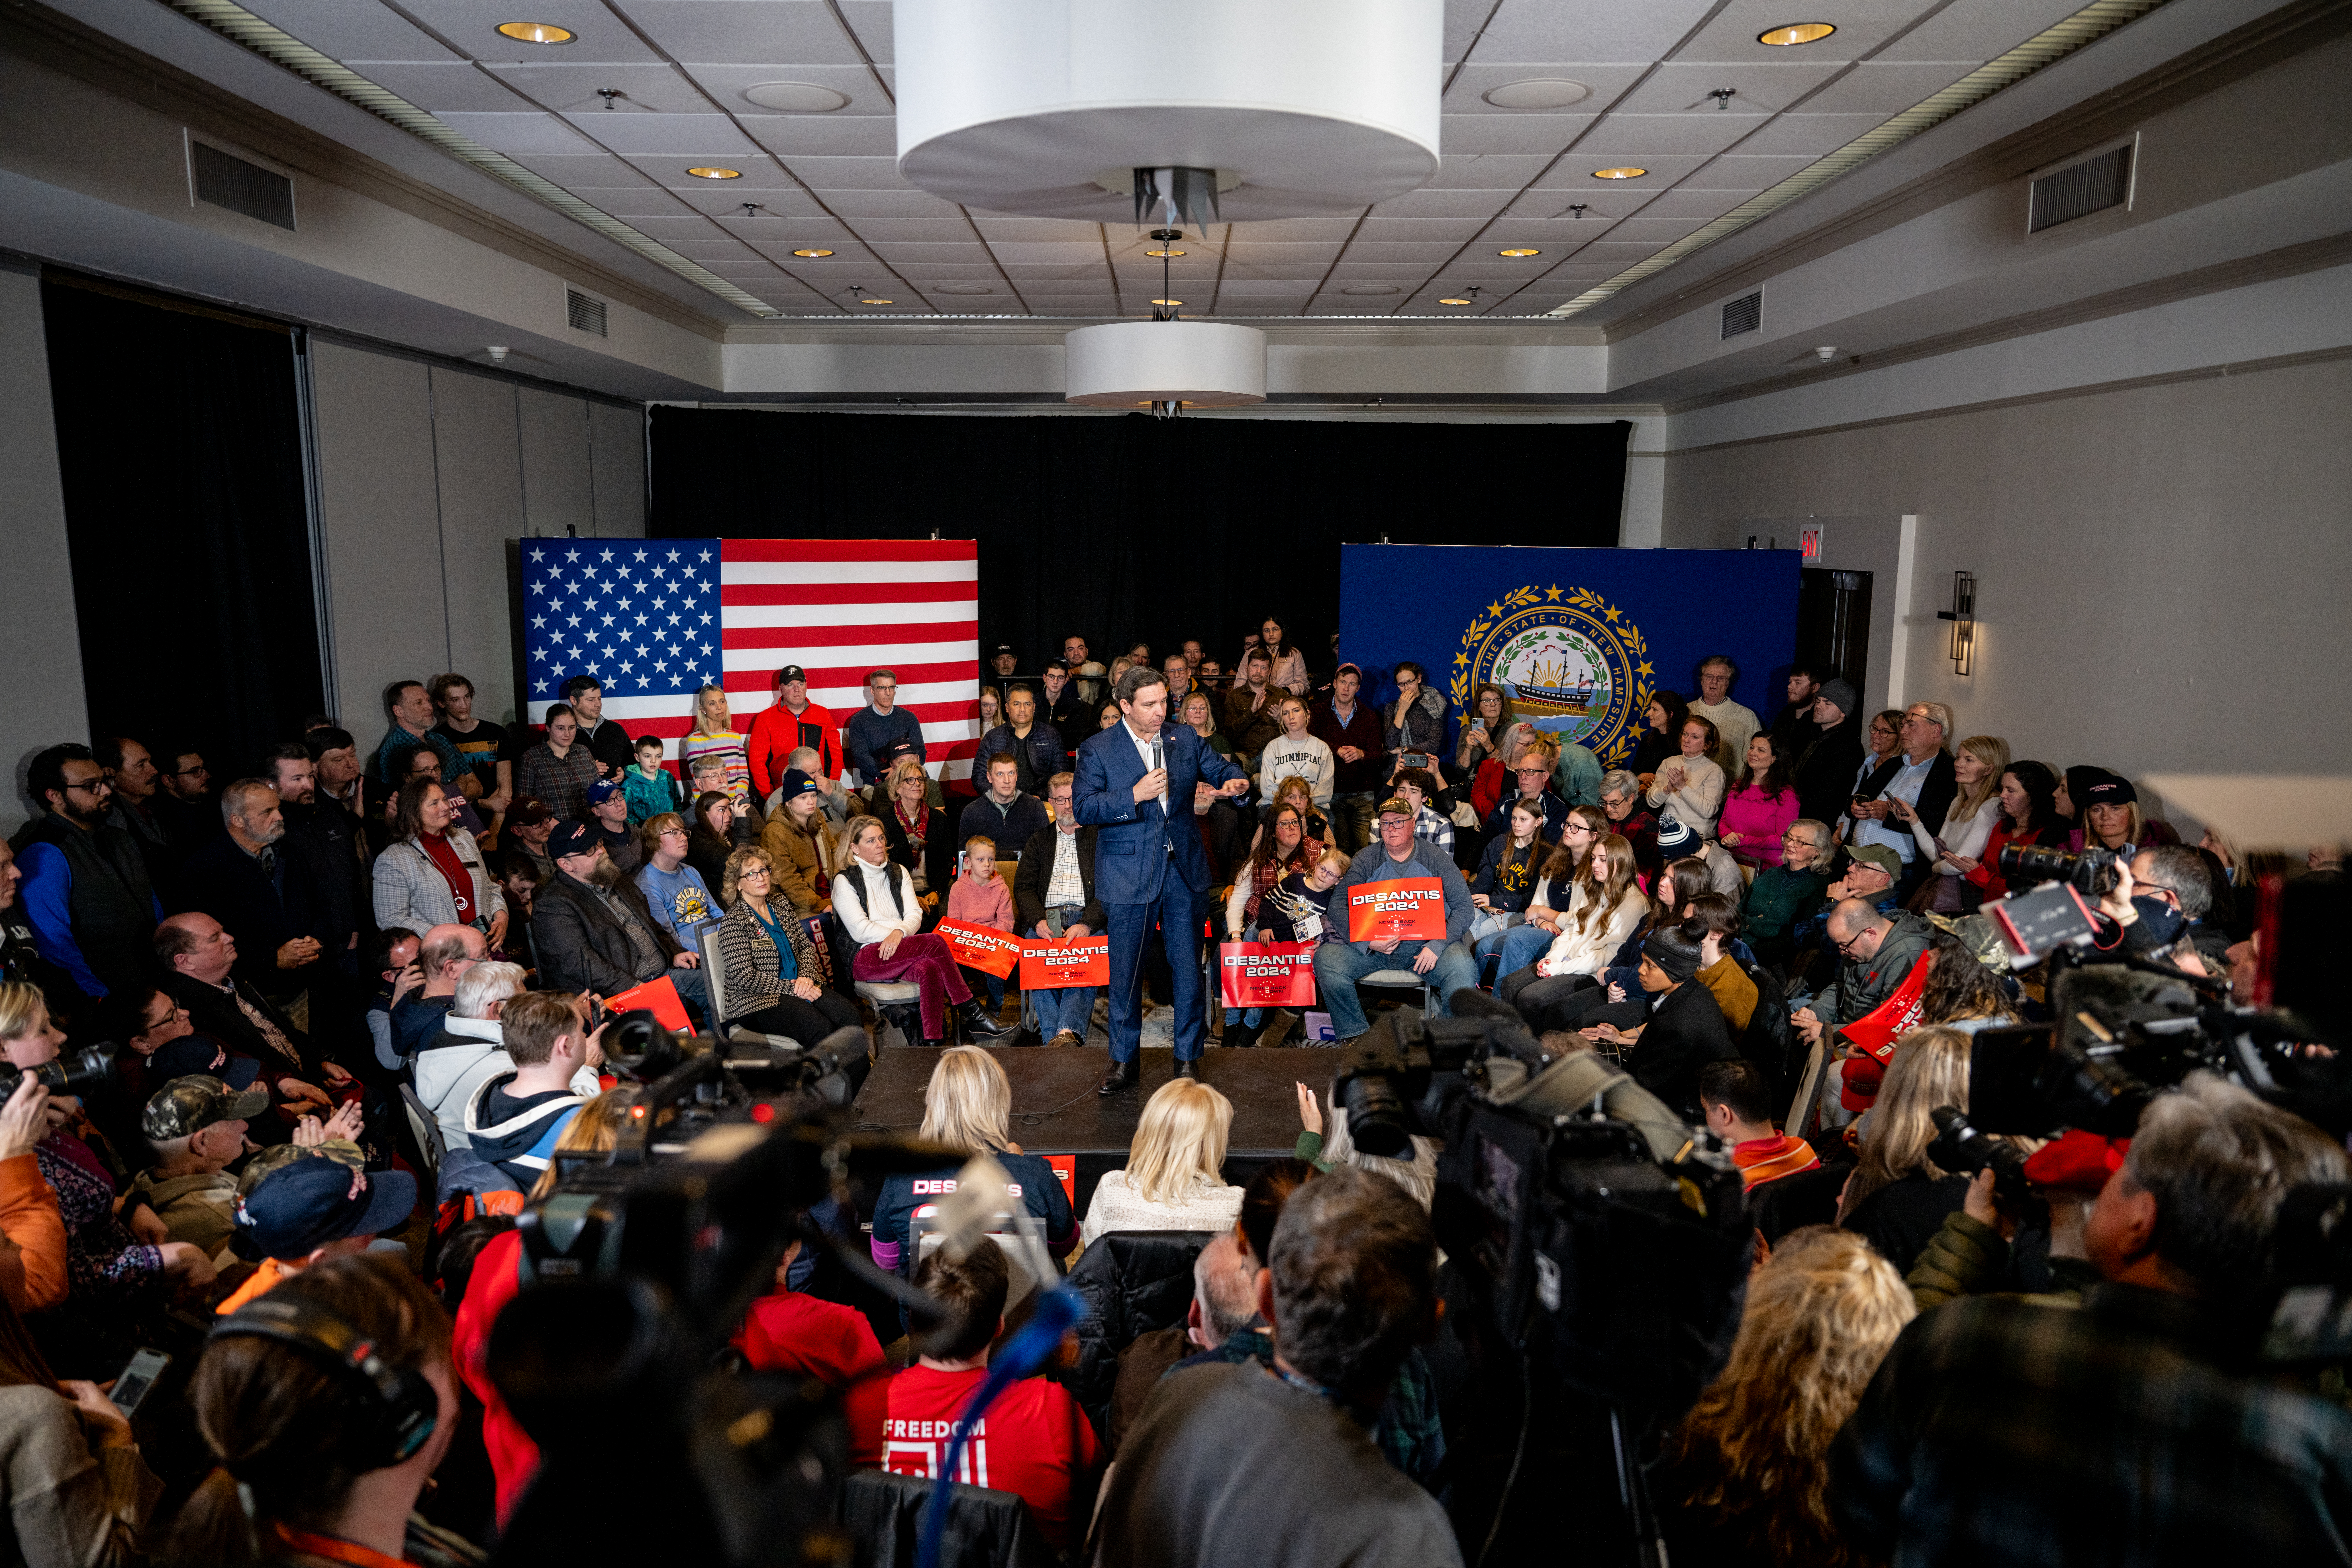 NASHUA, NEW HAMPSHIRE - JANUARY 19: Republican presidential candidate, Florida Gov. Ron DeSantis speaks to supporters during a campaign rally at the Courtyard by Marriott Nashua on January 19, 2024 in Nashua, New Hampshire. DeSantis continues campaigning in New Hampshire ahead of that state's primary on January 23. (Photo by Brandon Bell/Getty Images)